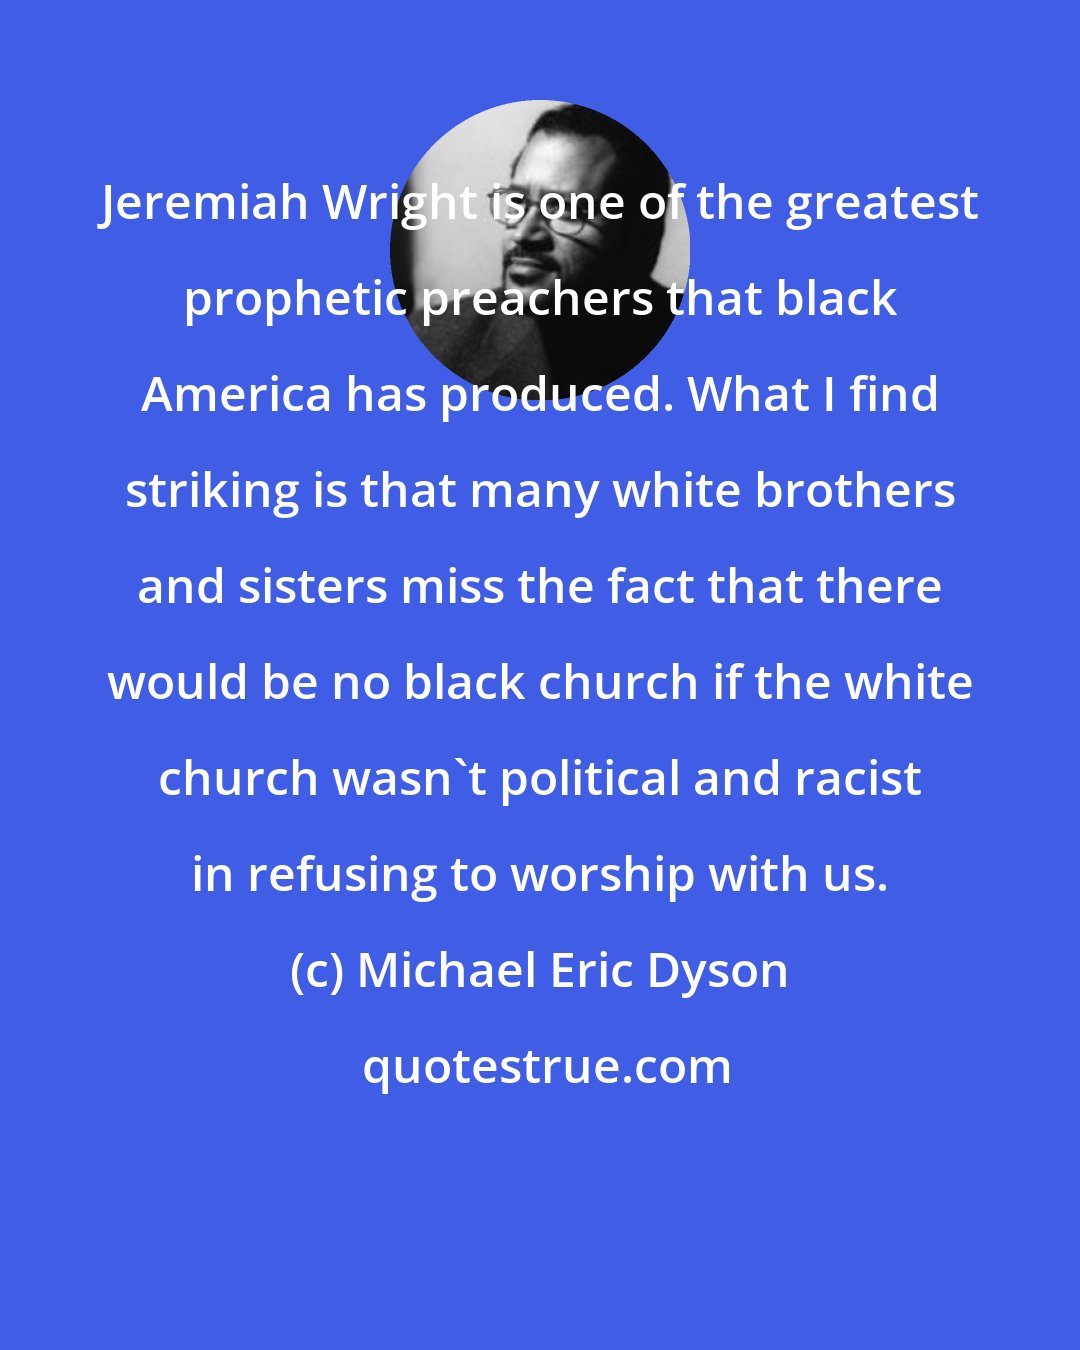 Michael Eric Dyson: Jeremiah Wright is one of the greatest prophetic preachers that black America has produced. What I find striking is that many white brothers and sisters miss the fact that there would be no black church if the white church wasn't political and racist in refusing to worship with us.